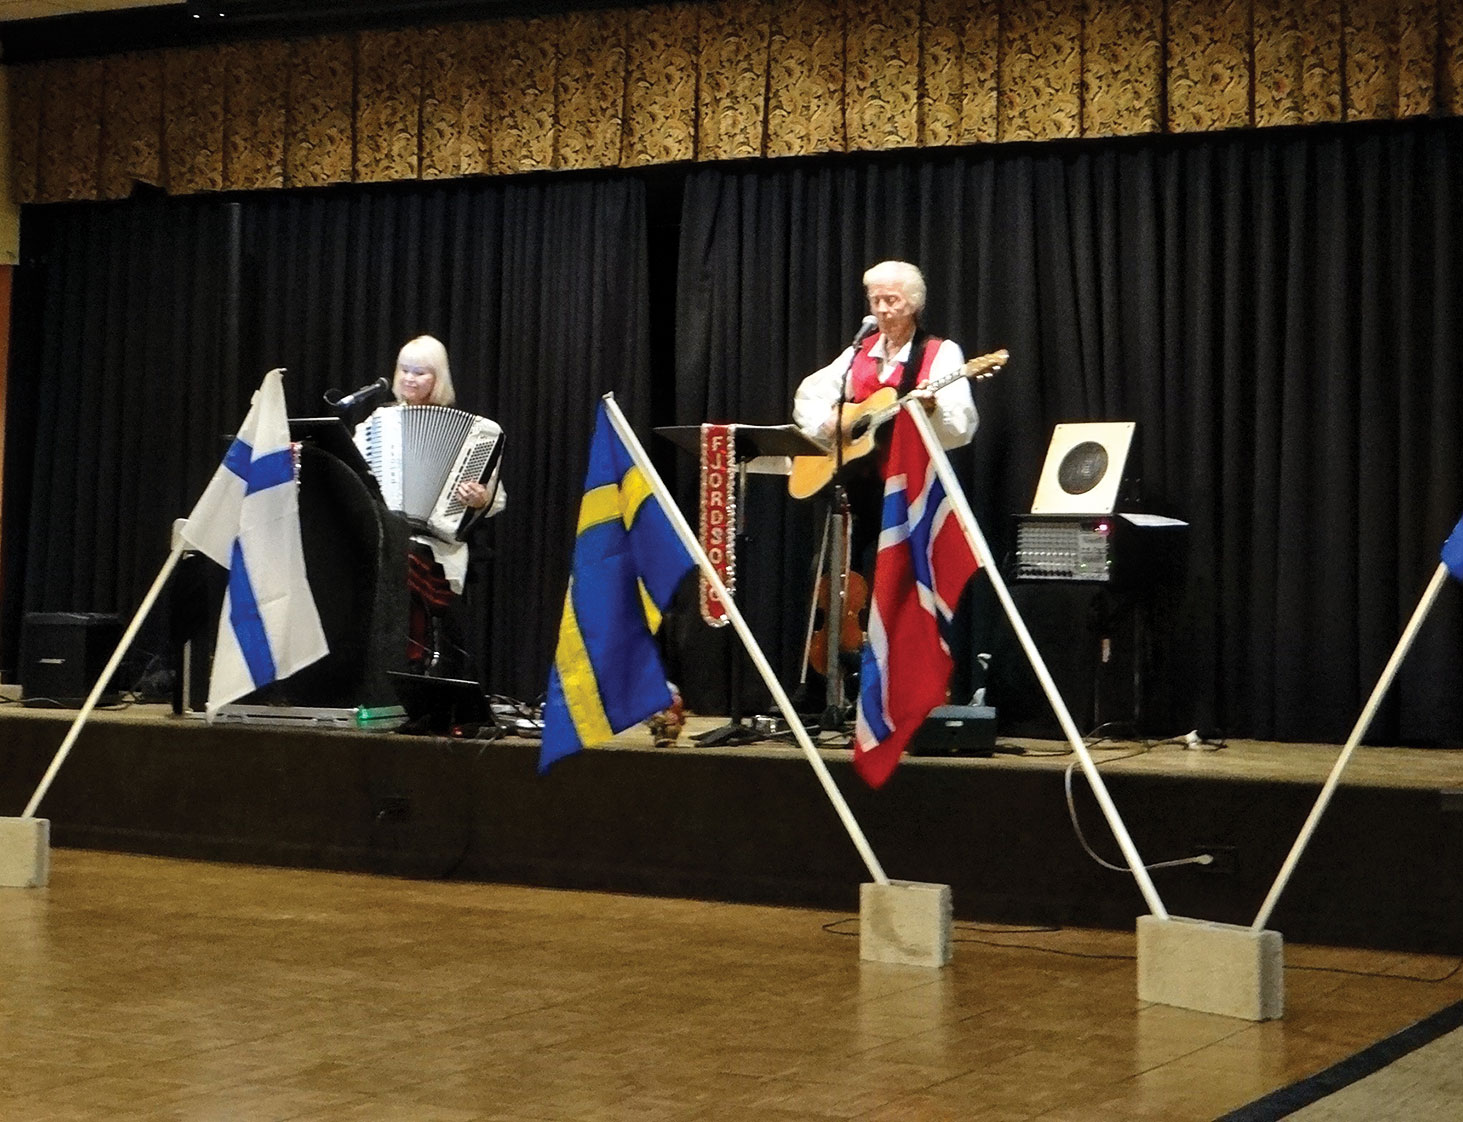 Celebrating our Scandinavian heritage with the five countries flags and national anthems on March 17 are Sylvia Jorgensen and Carl Nyberg.